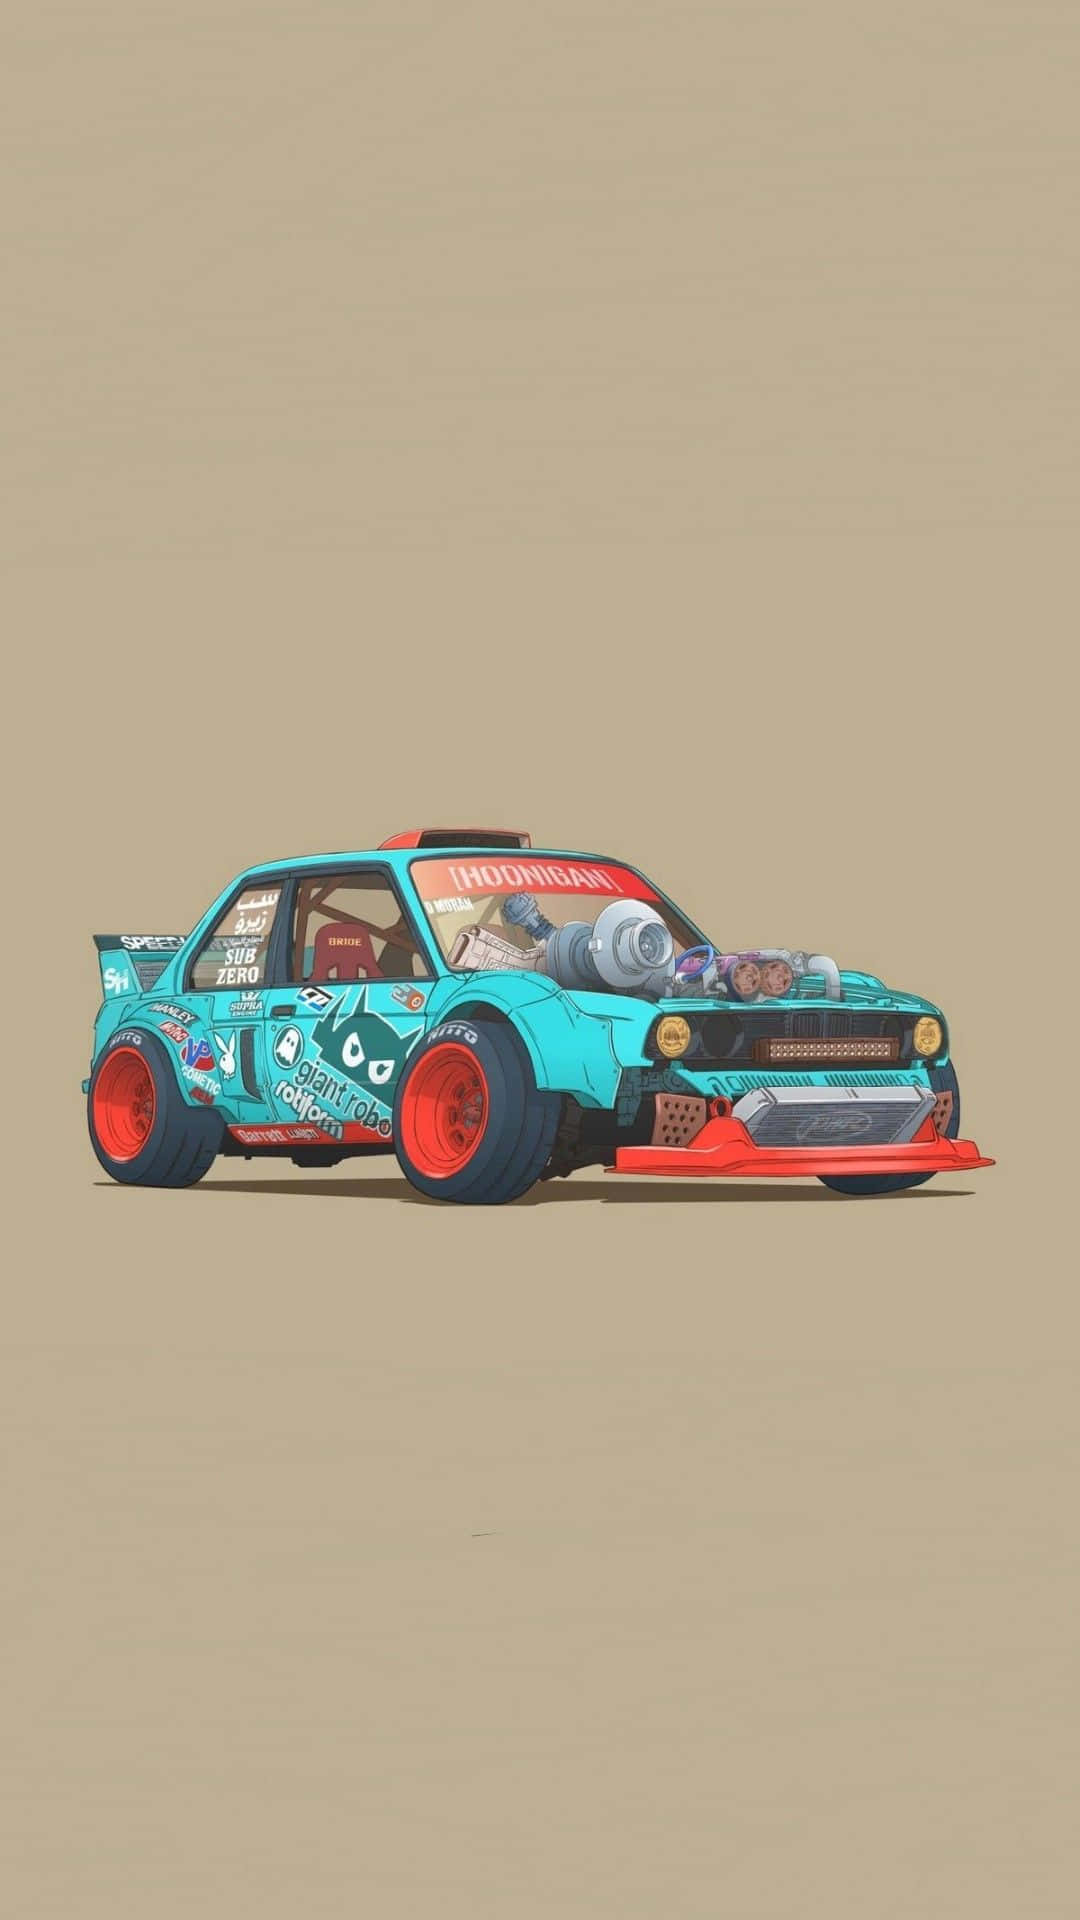 A Cartoon Car With A Red And Blue Paint Job Wallpaper